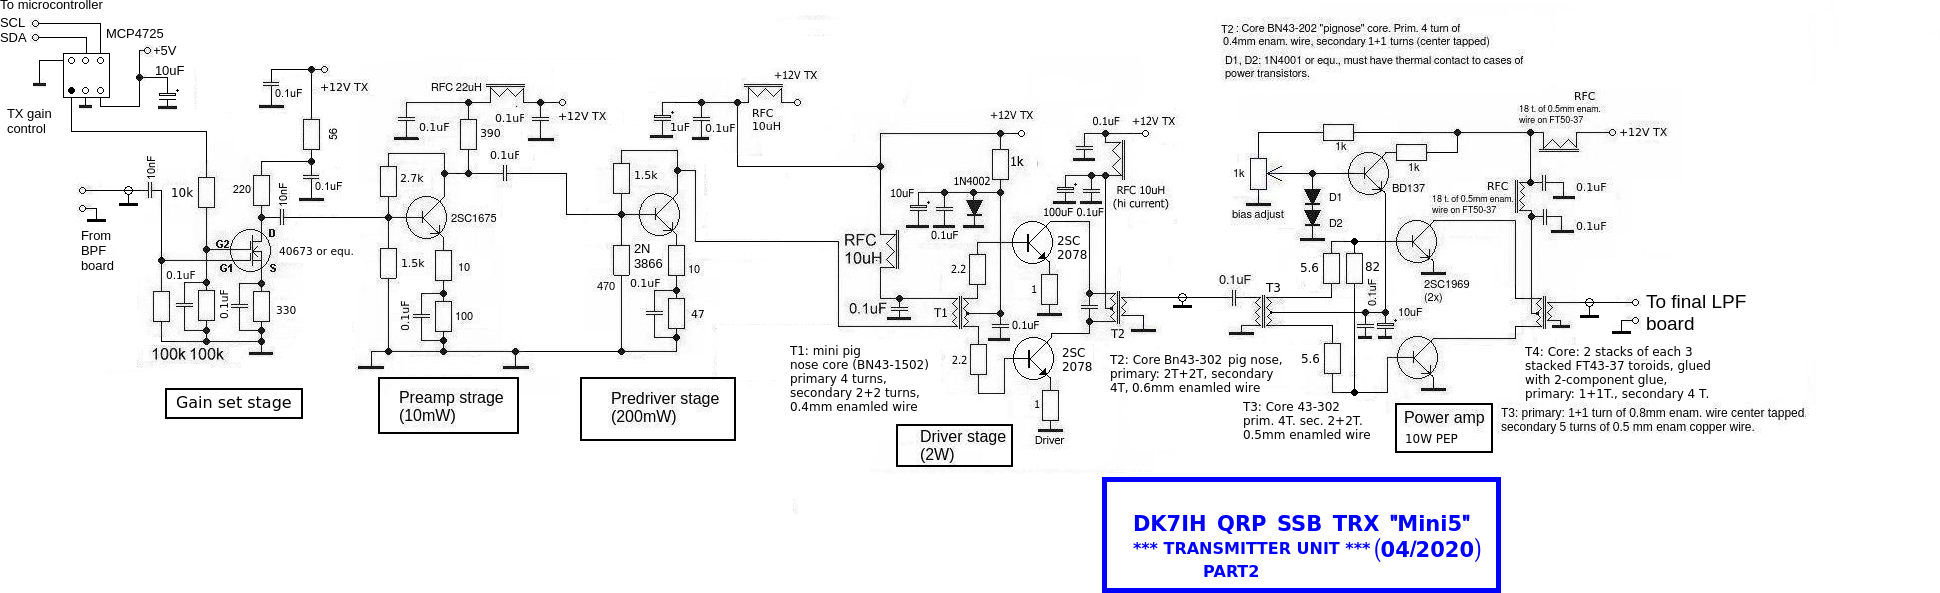 DK7IH Multiband QRP Transceiver for 5 Bands 2020 - Final power amplifier stages